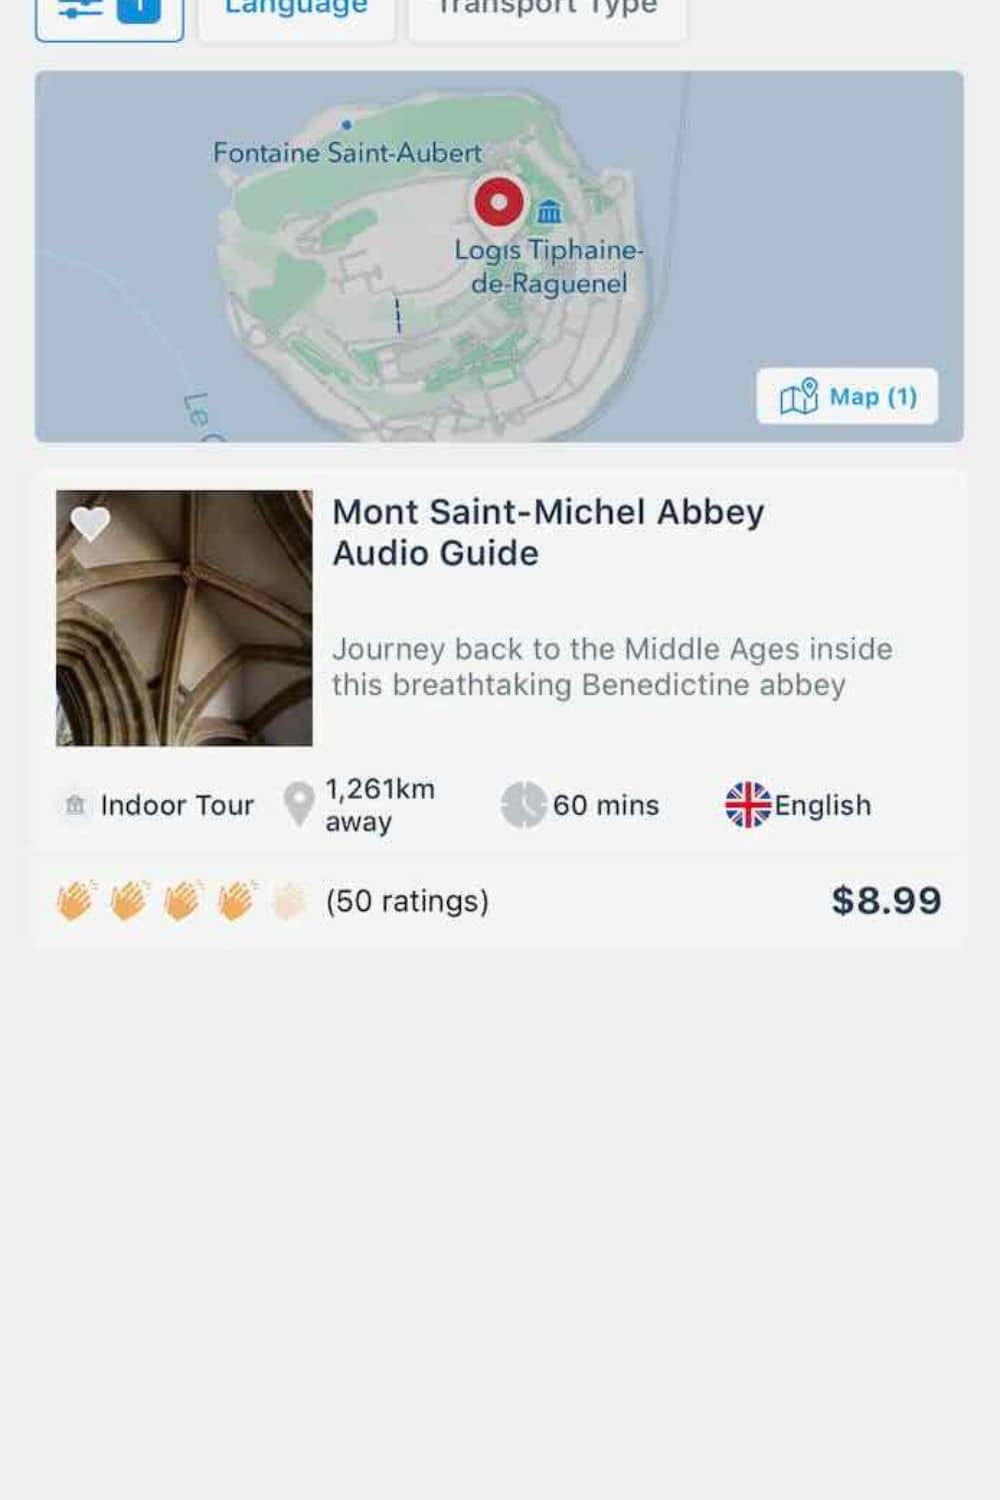 App screen displaying details of the Mont Saint-Michel Abbey audio guide tour, showing distance, duration, and price